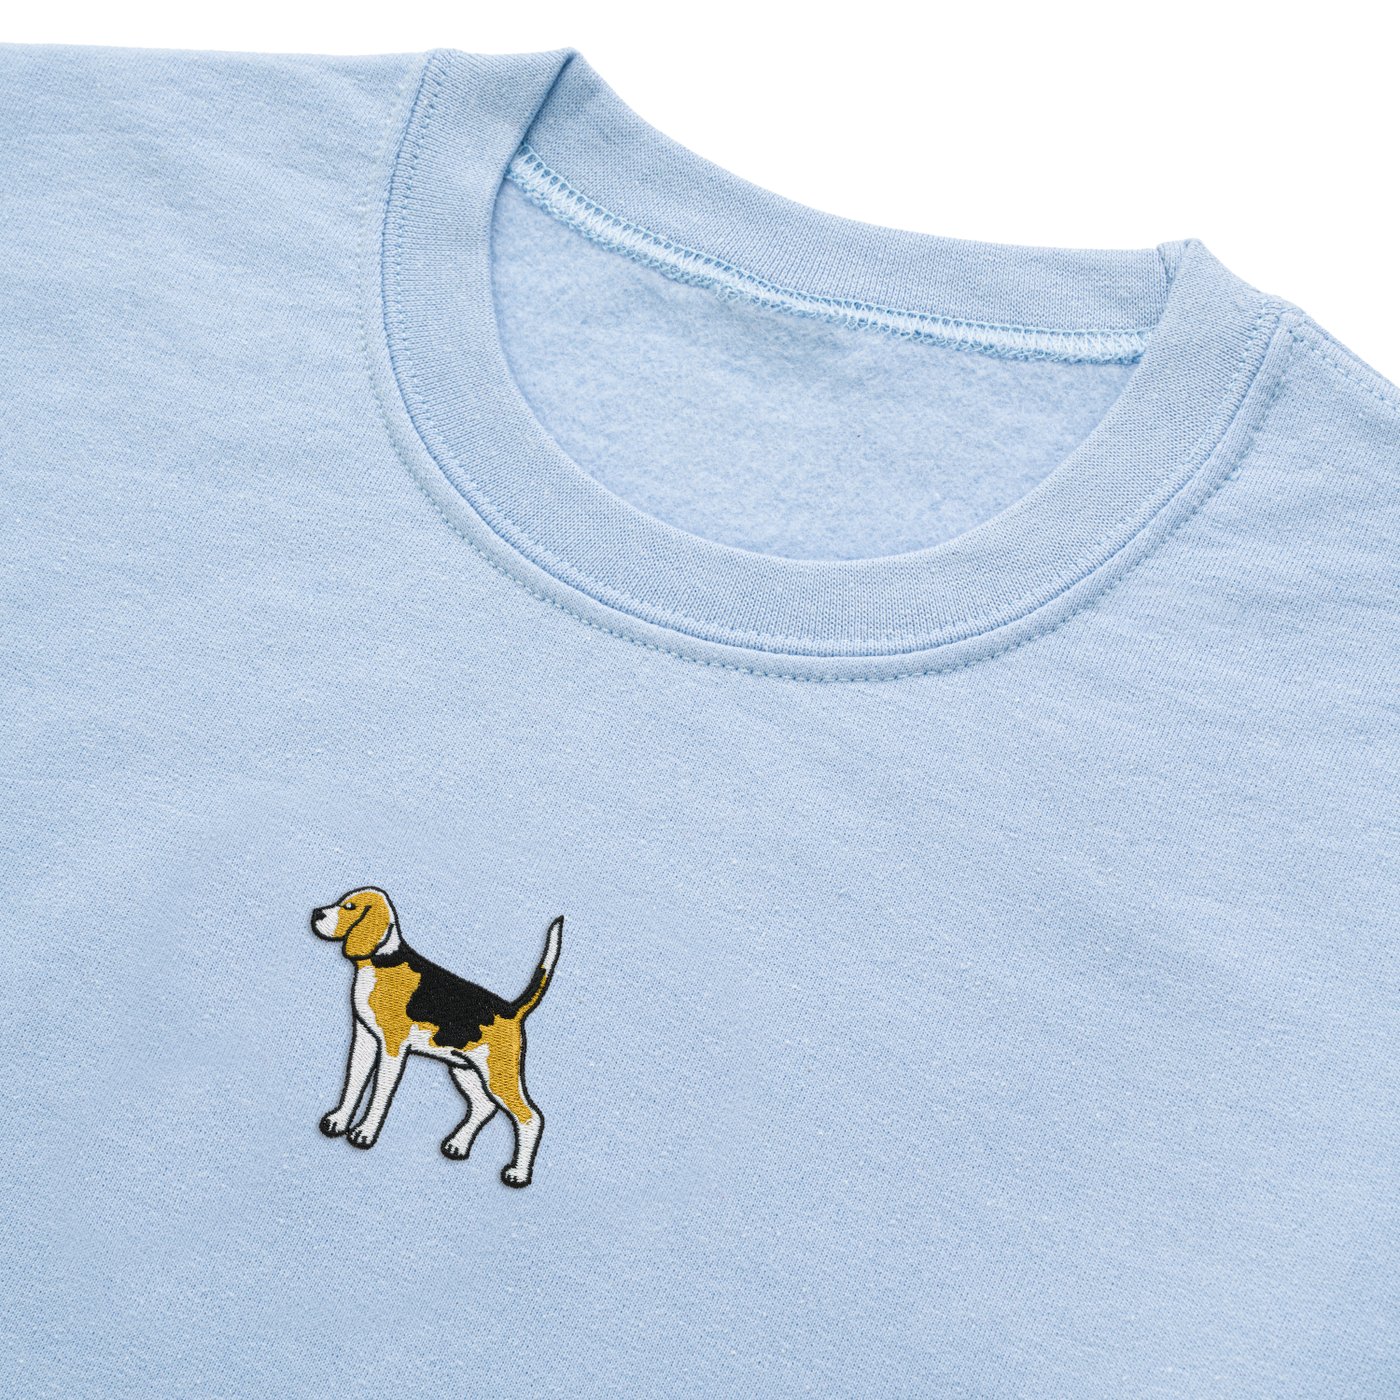 Bobby's Planet Women's Embroidered Beagle Sweatshirt from Paws Dog Cat Animals Collection in Light Blue Color#color_light-blue